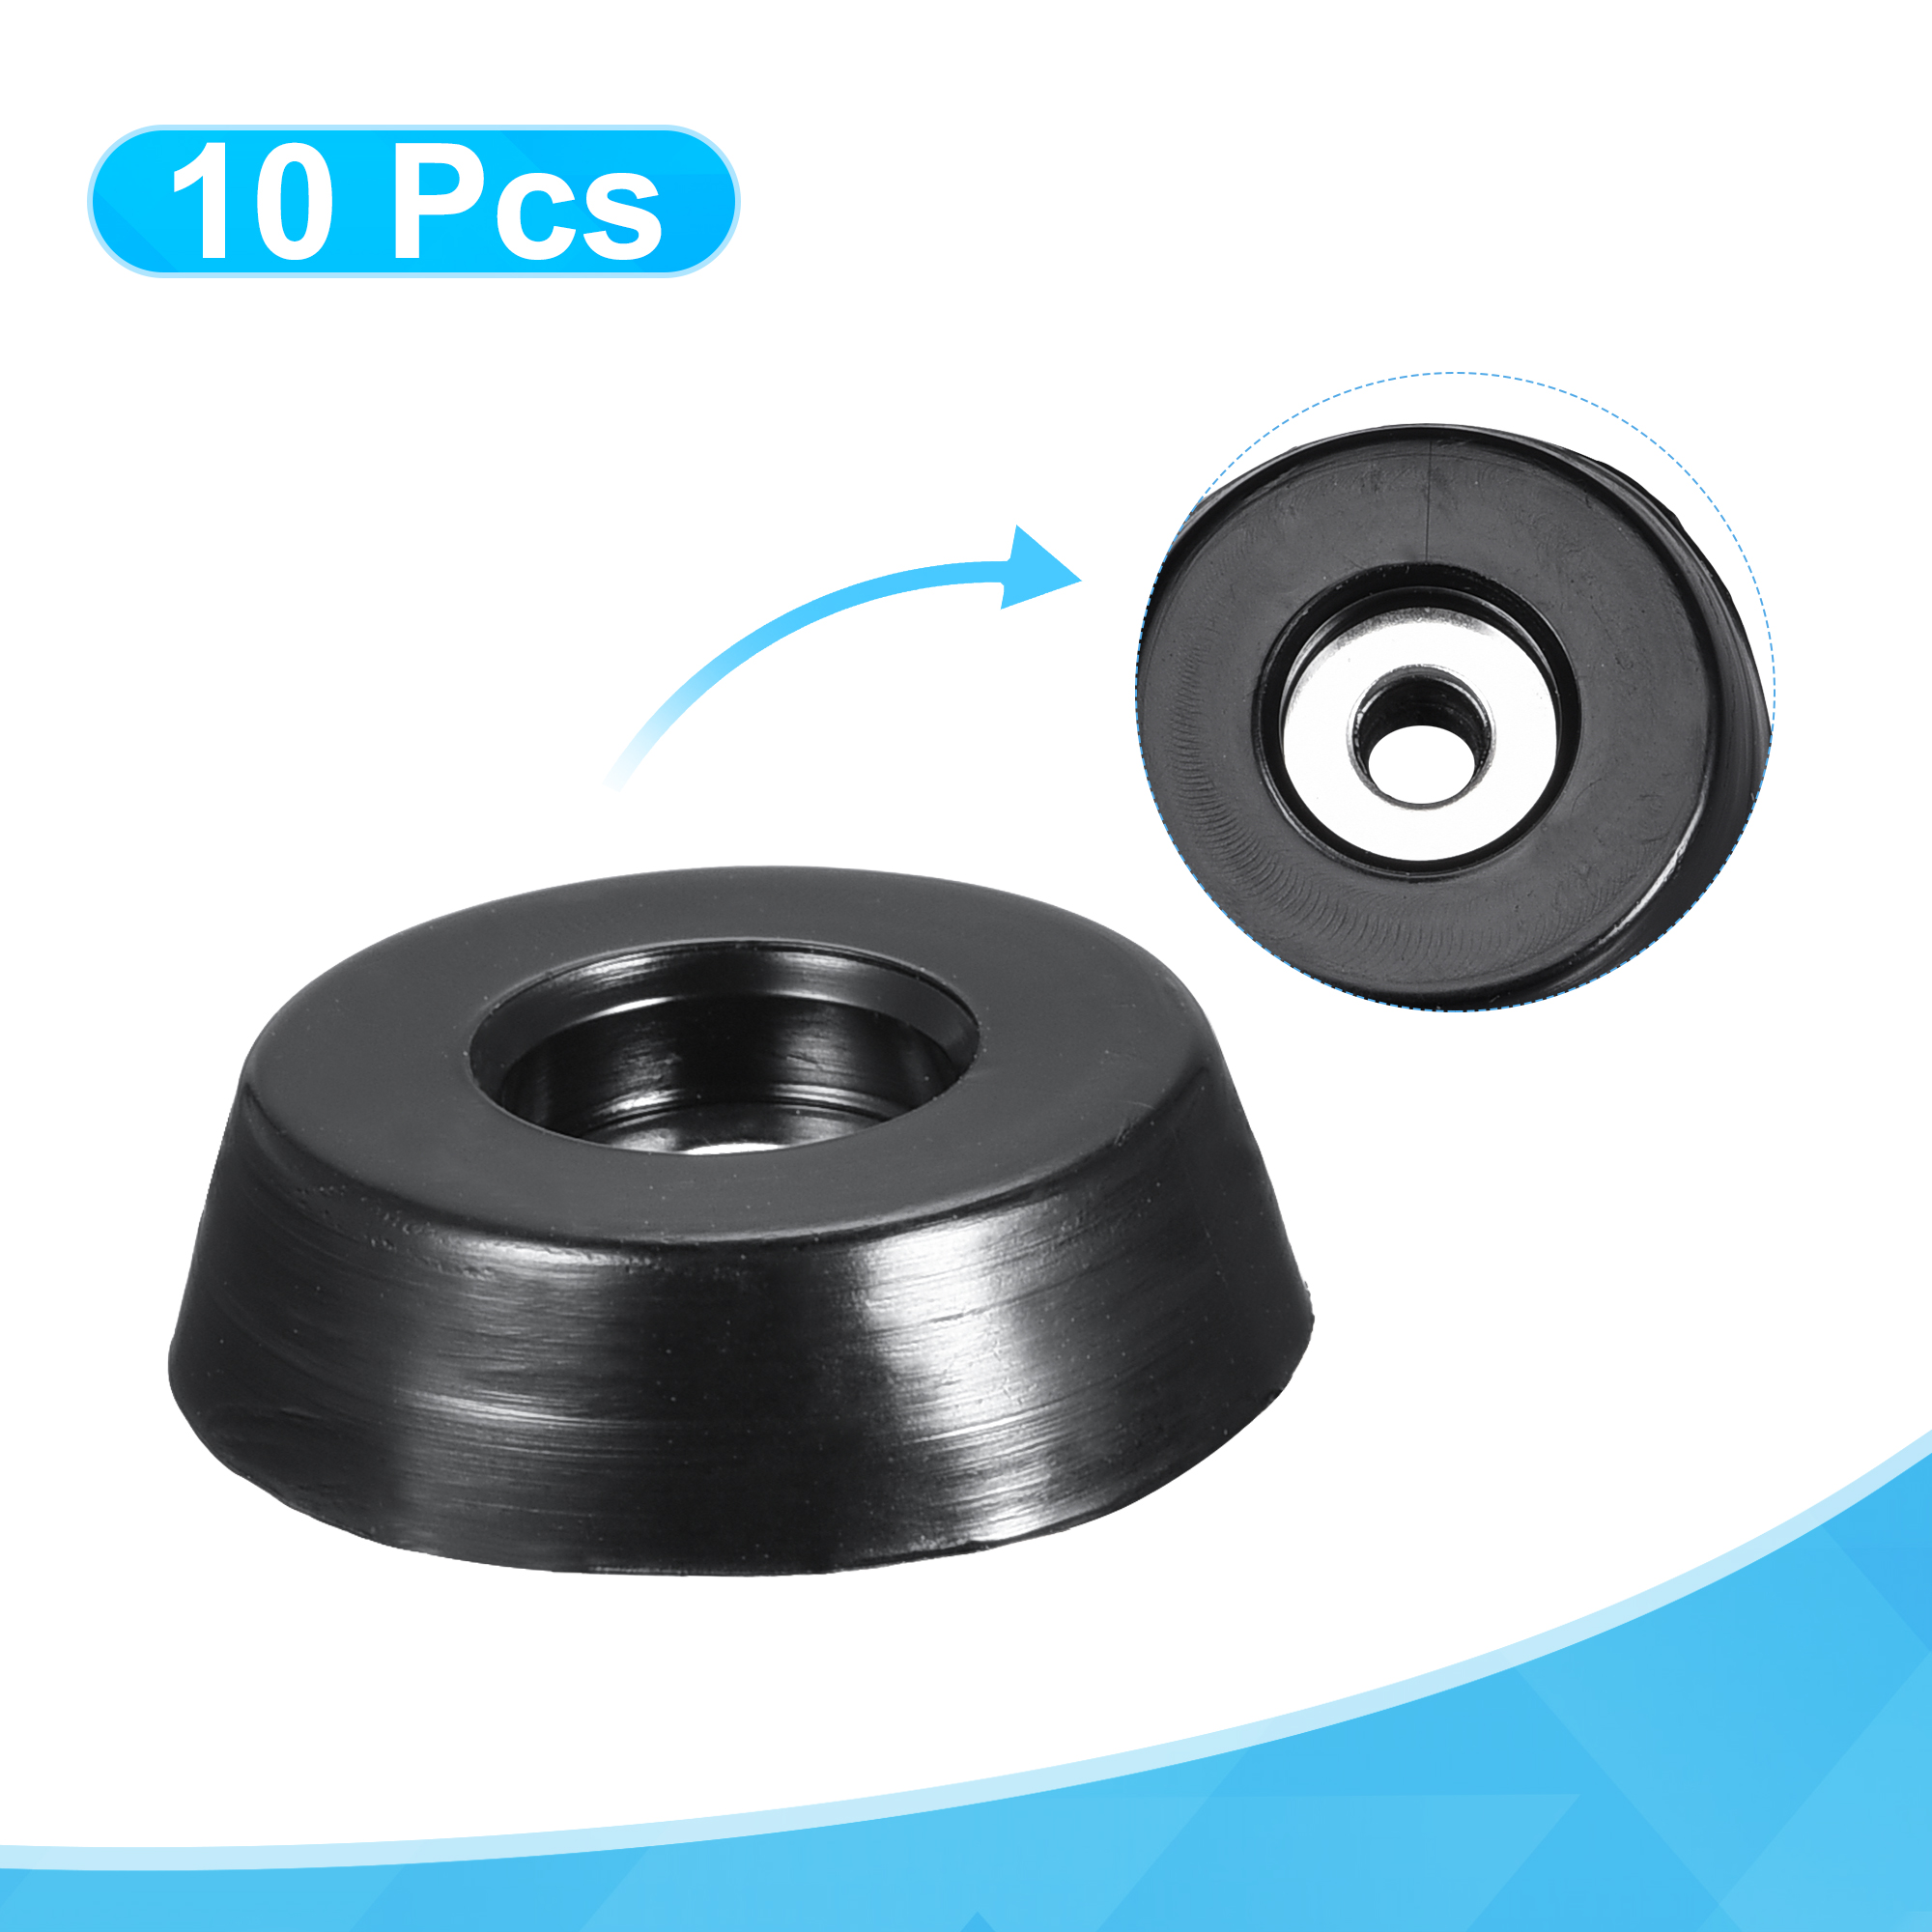 Uxcell 0.71" W x  0.2" H Rubber Bumper Feet, Stainless Steel Screws and Washer 10 Pack - image 4 of 5